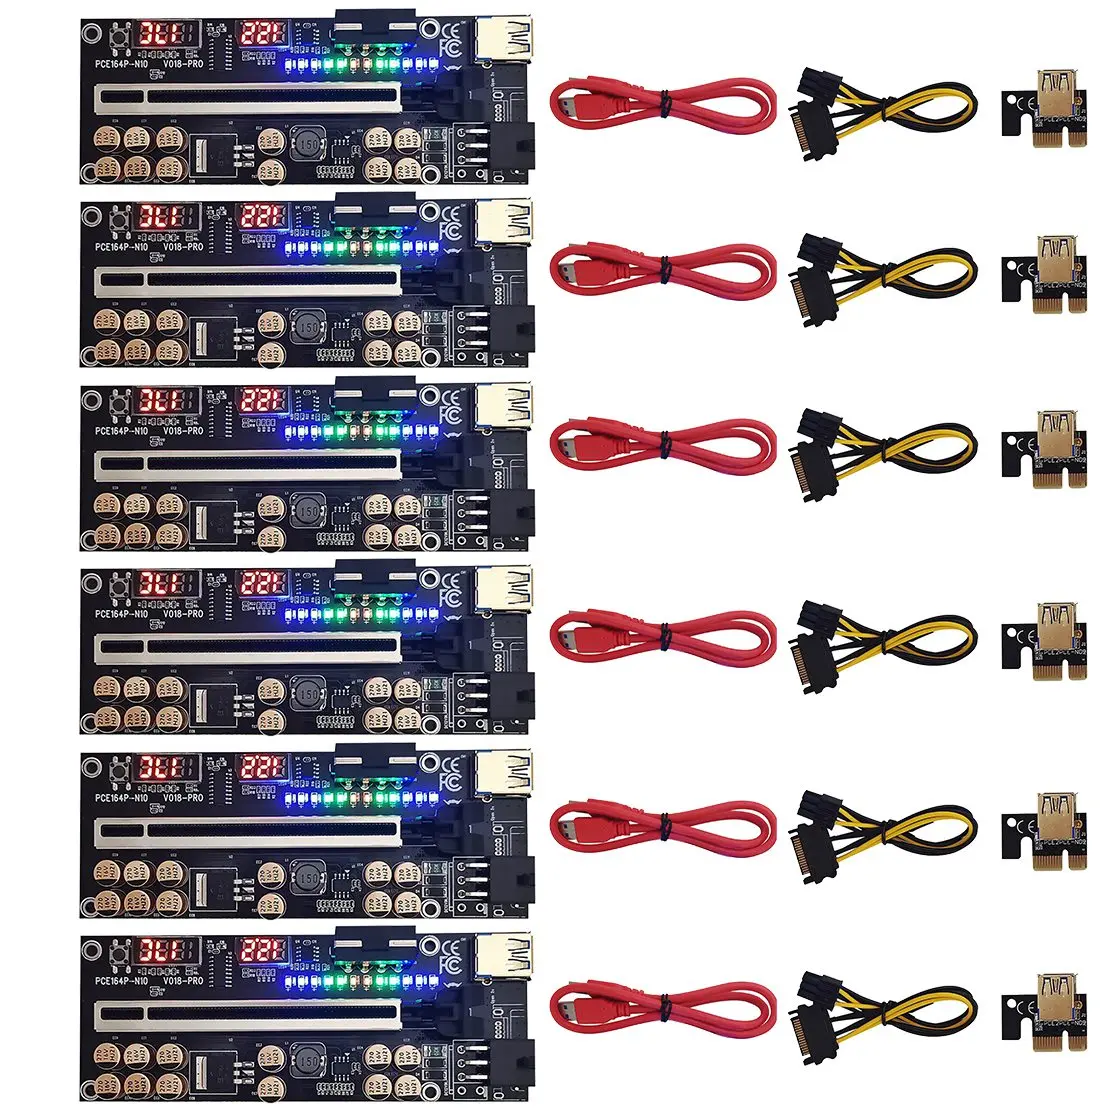 

6 Pcs New VER018 PRO PCI-E 1X to 16X GPU Extension Cable Riser Card with LED Lights/Voltage/Temperature Display Black